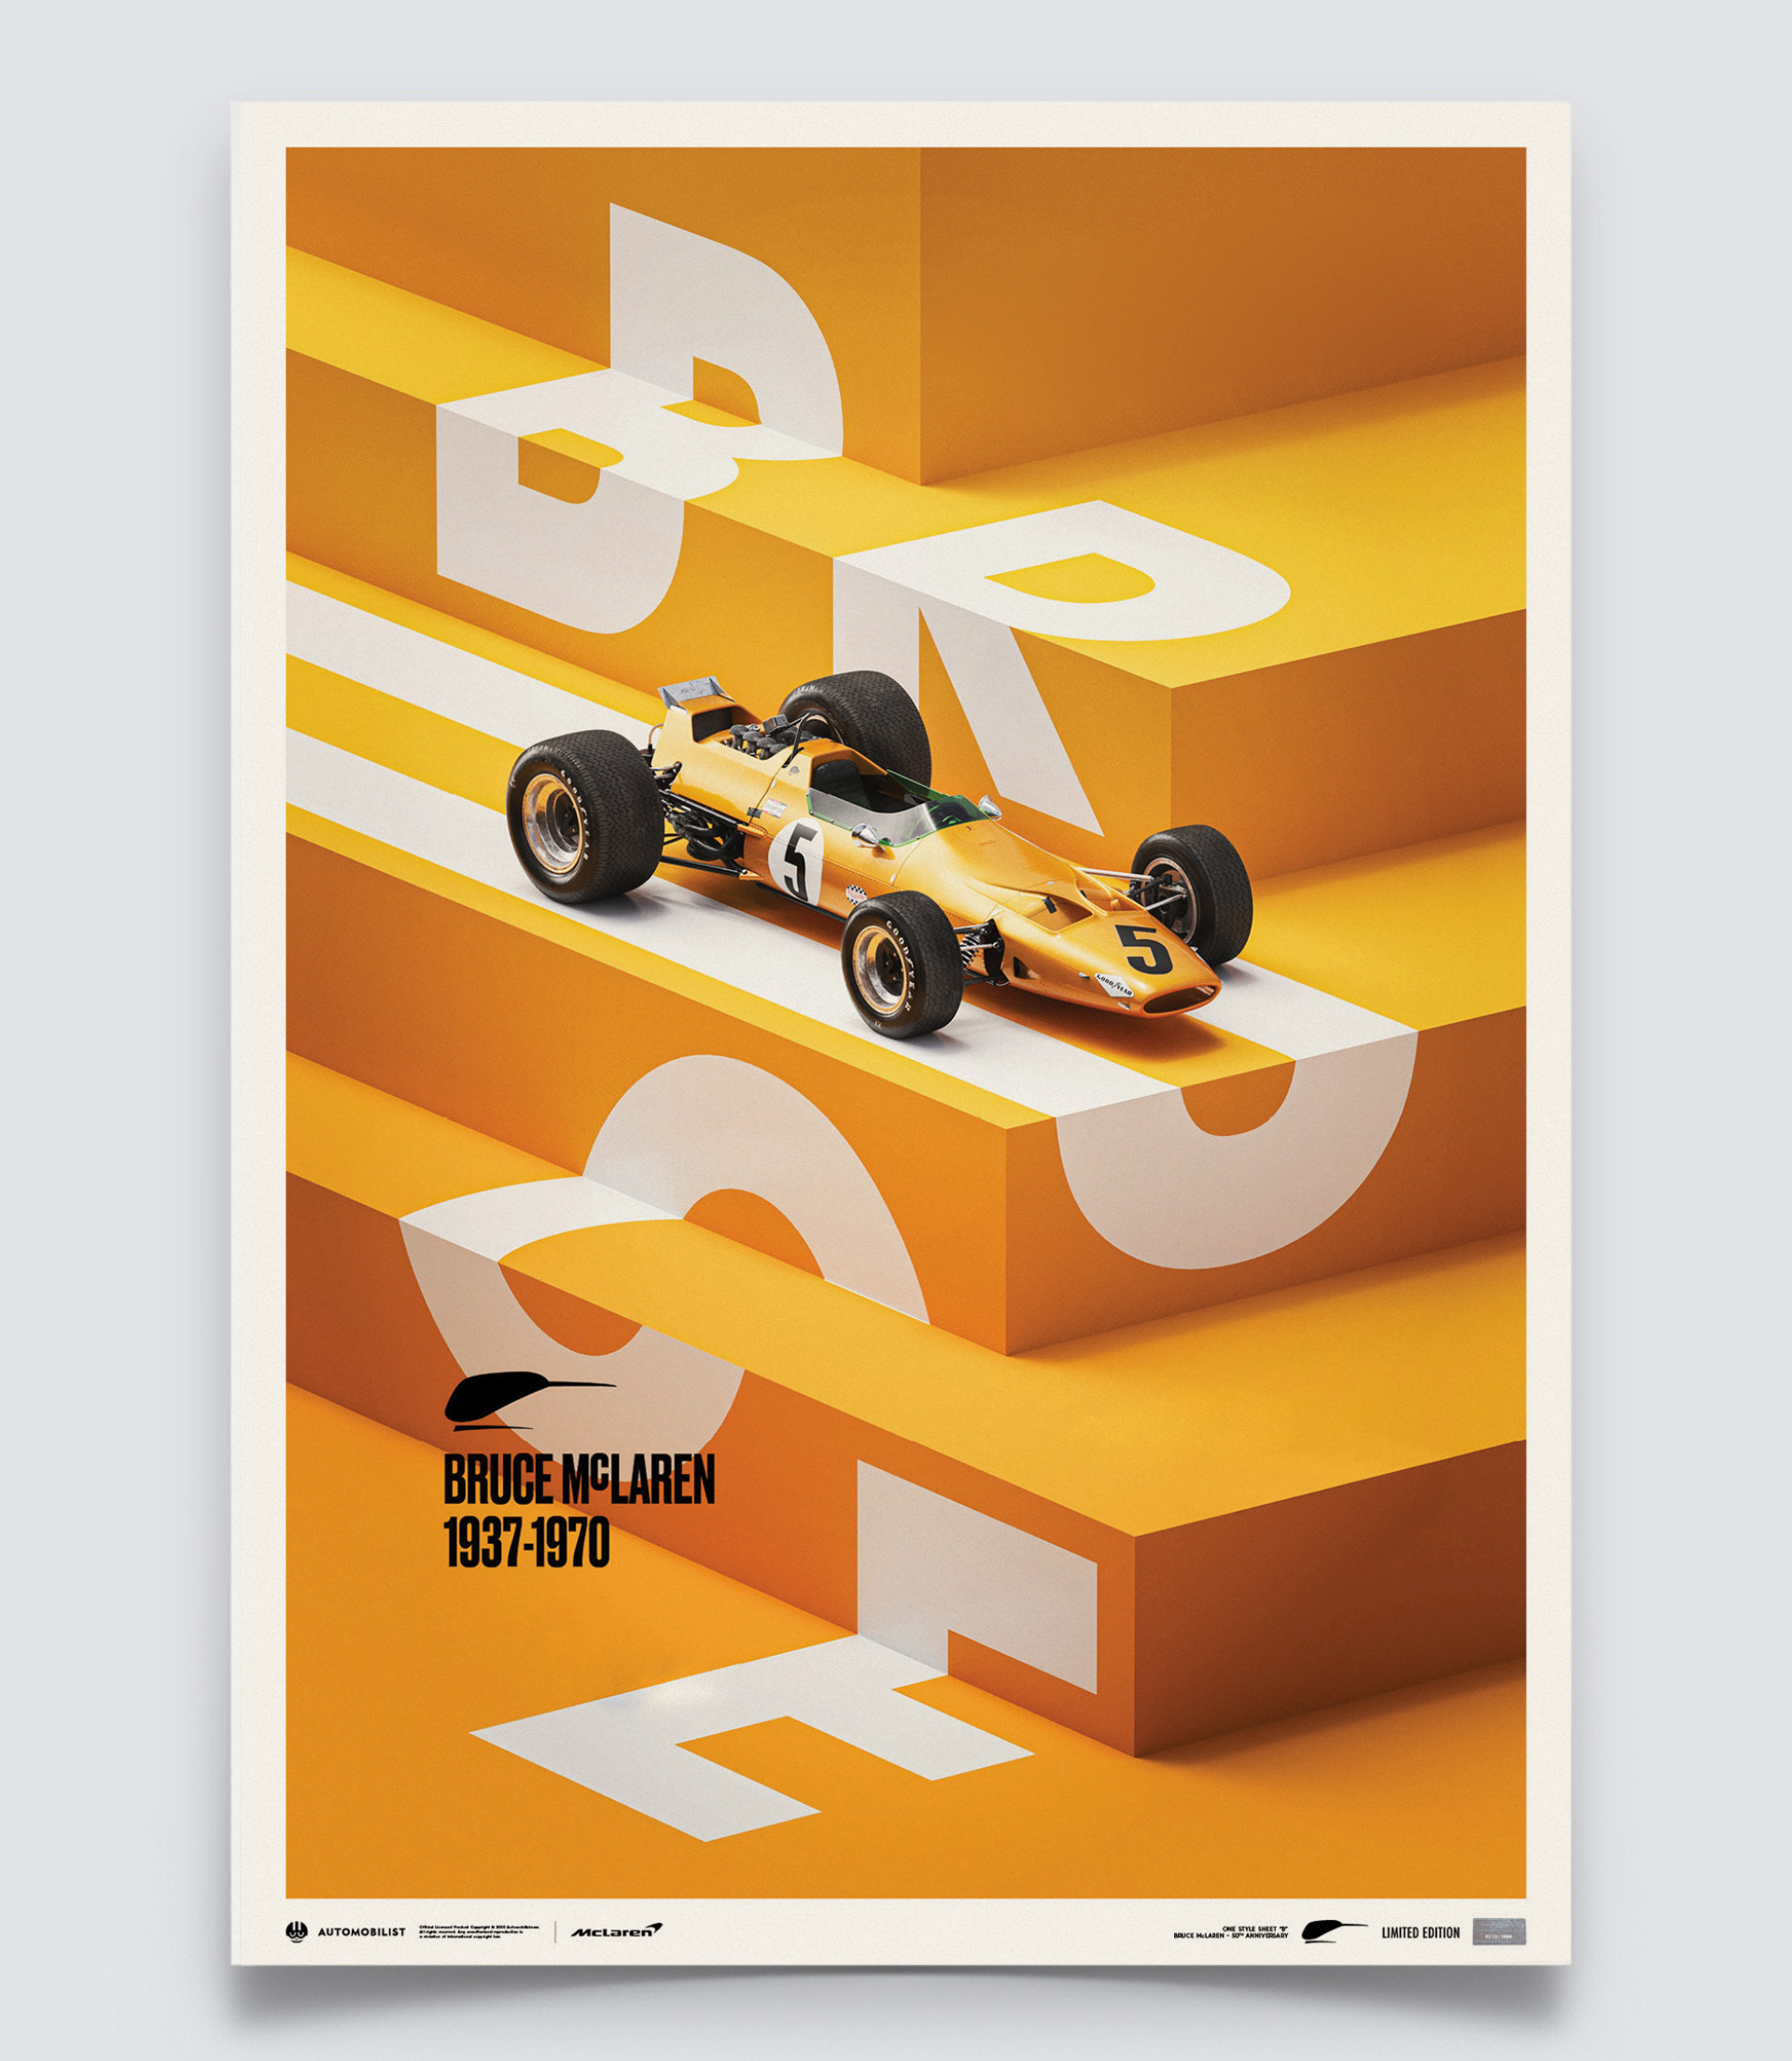 BRUCE McLAREN 1937-1970 SPECIAL - SPA-FRANCORCHAMPS CIRCUIT - 1968 F1 COLLECTOR'S EDITION